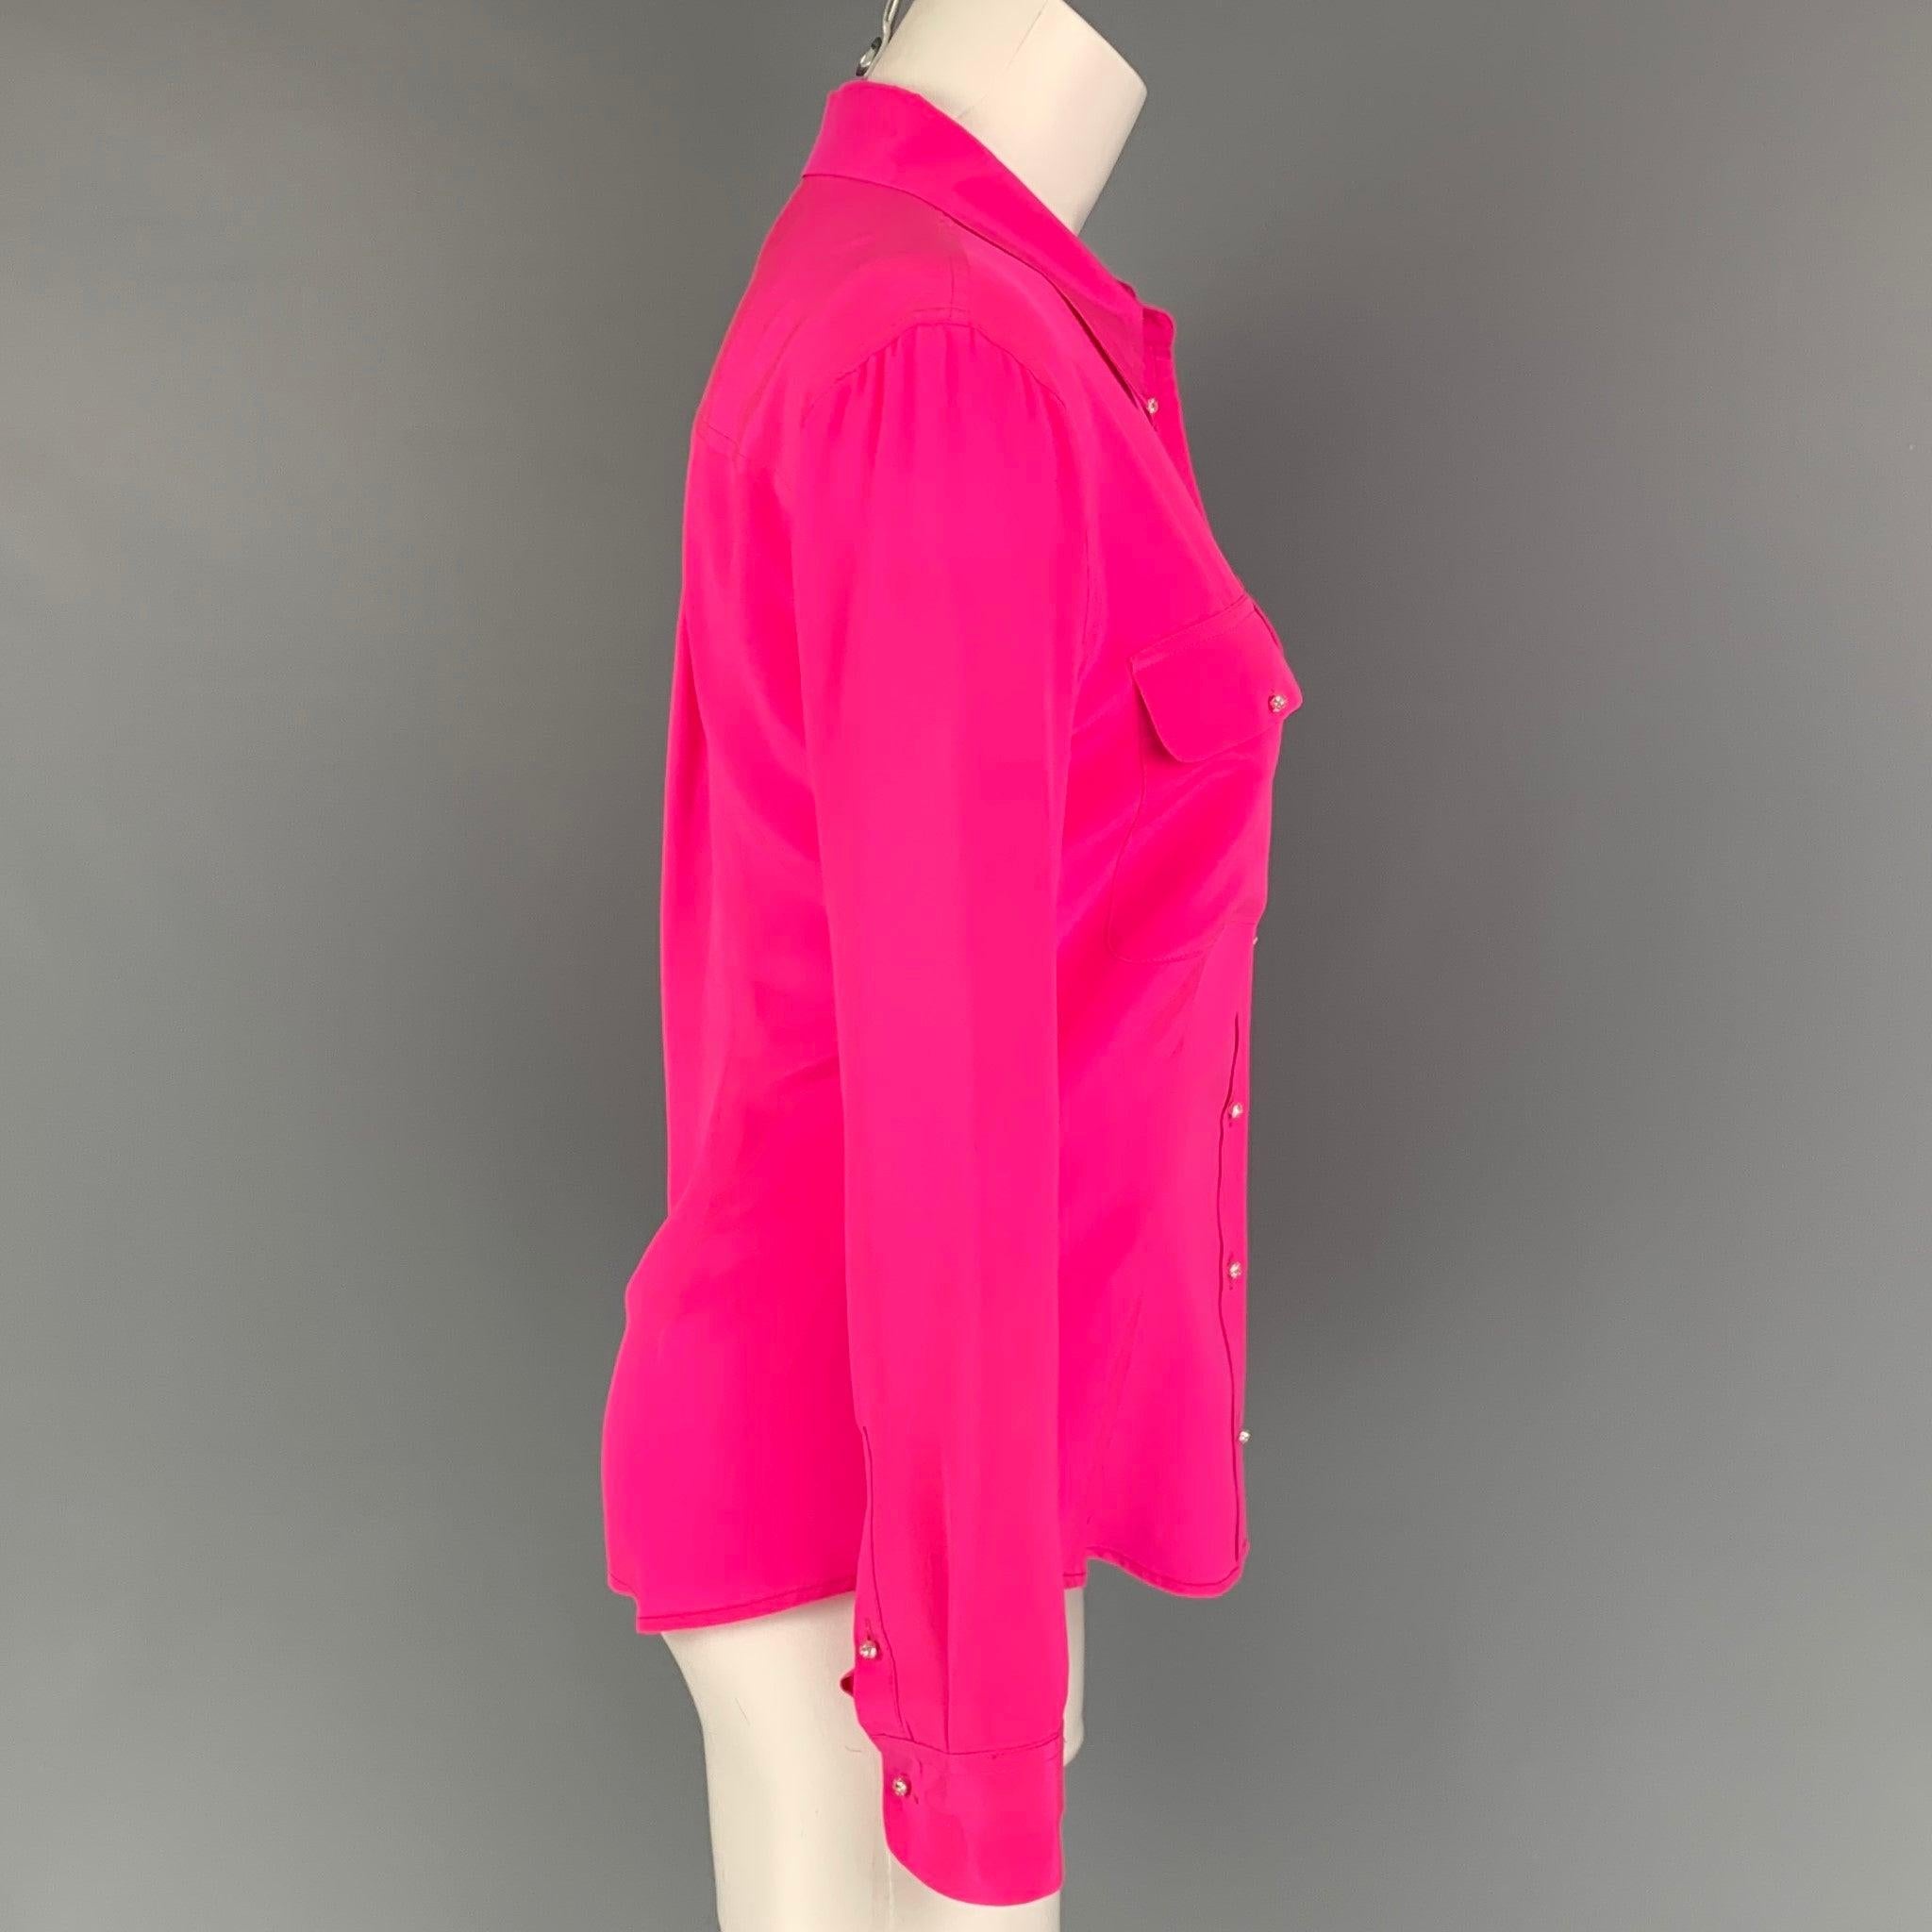 EQUIPMENT shirt coms in a pink silk featuring rhinestone buttons, flap pockets, and a spread collar.
Very Good
Pre-Owned Condition. 

Marked:   S 

Measurements: 
 
Shoulder: 16 inches  Bust: 35 inches  Sleeve: 24 inches  Length: 25 inches 
  
  
